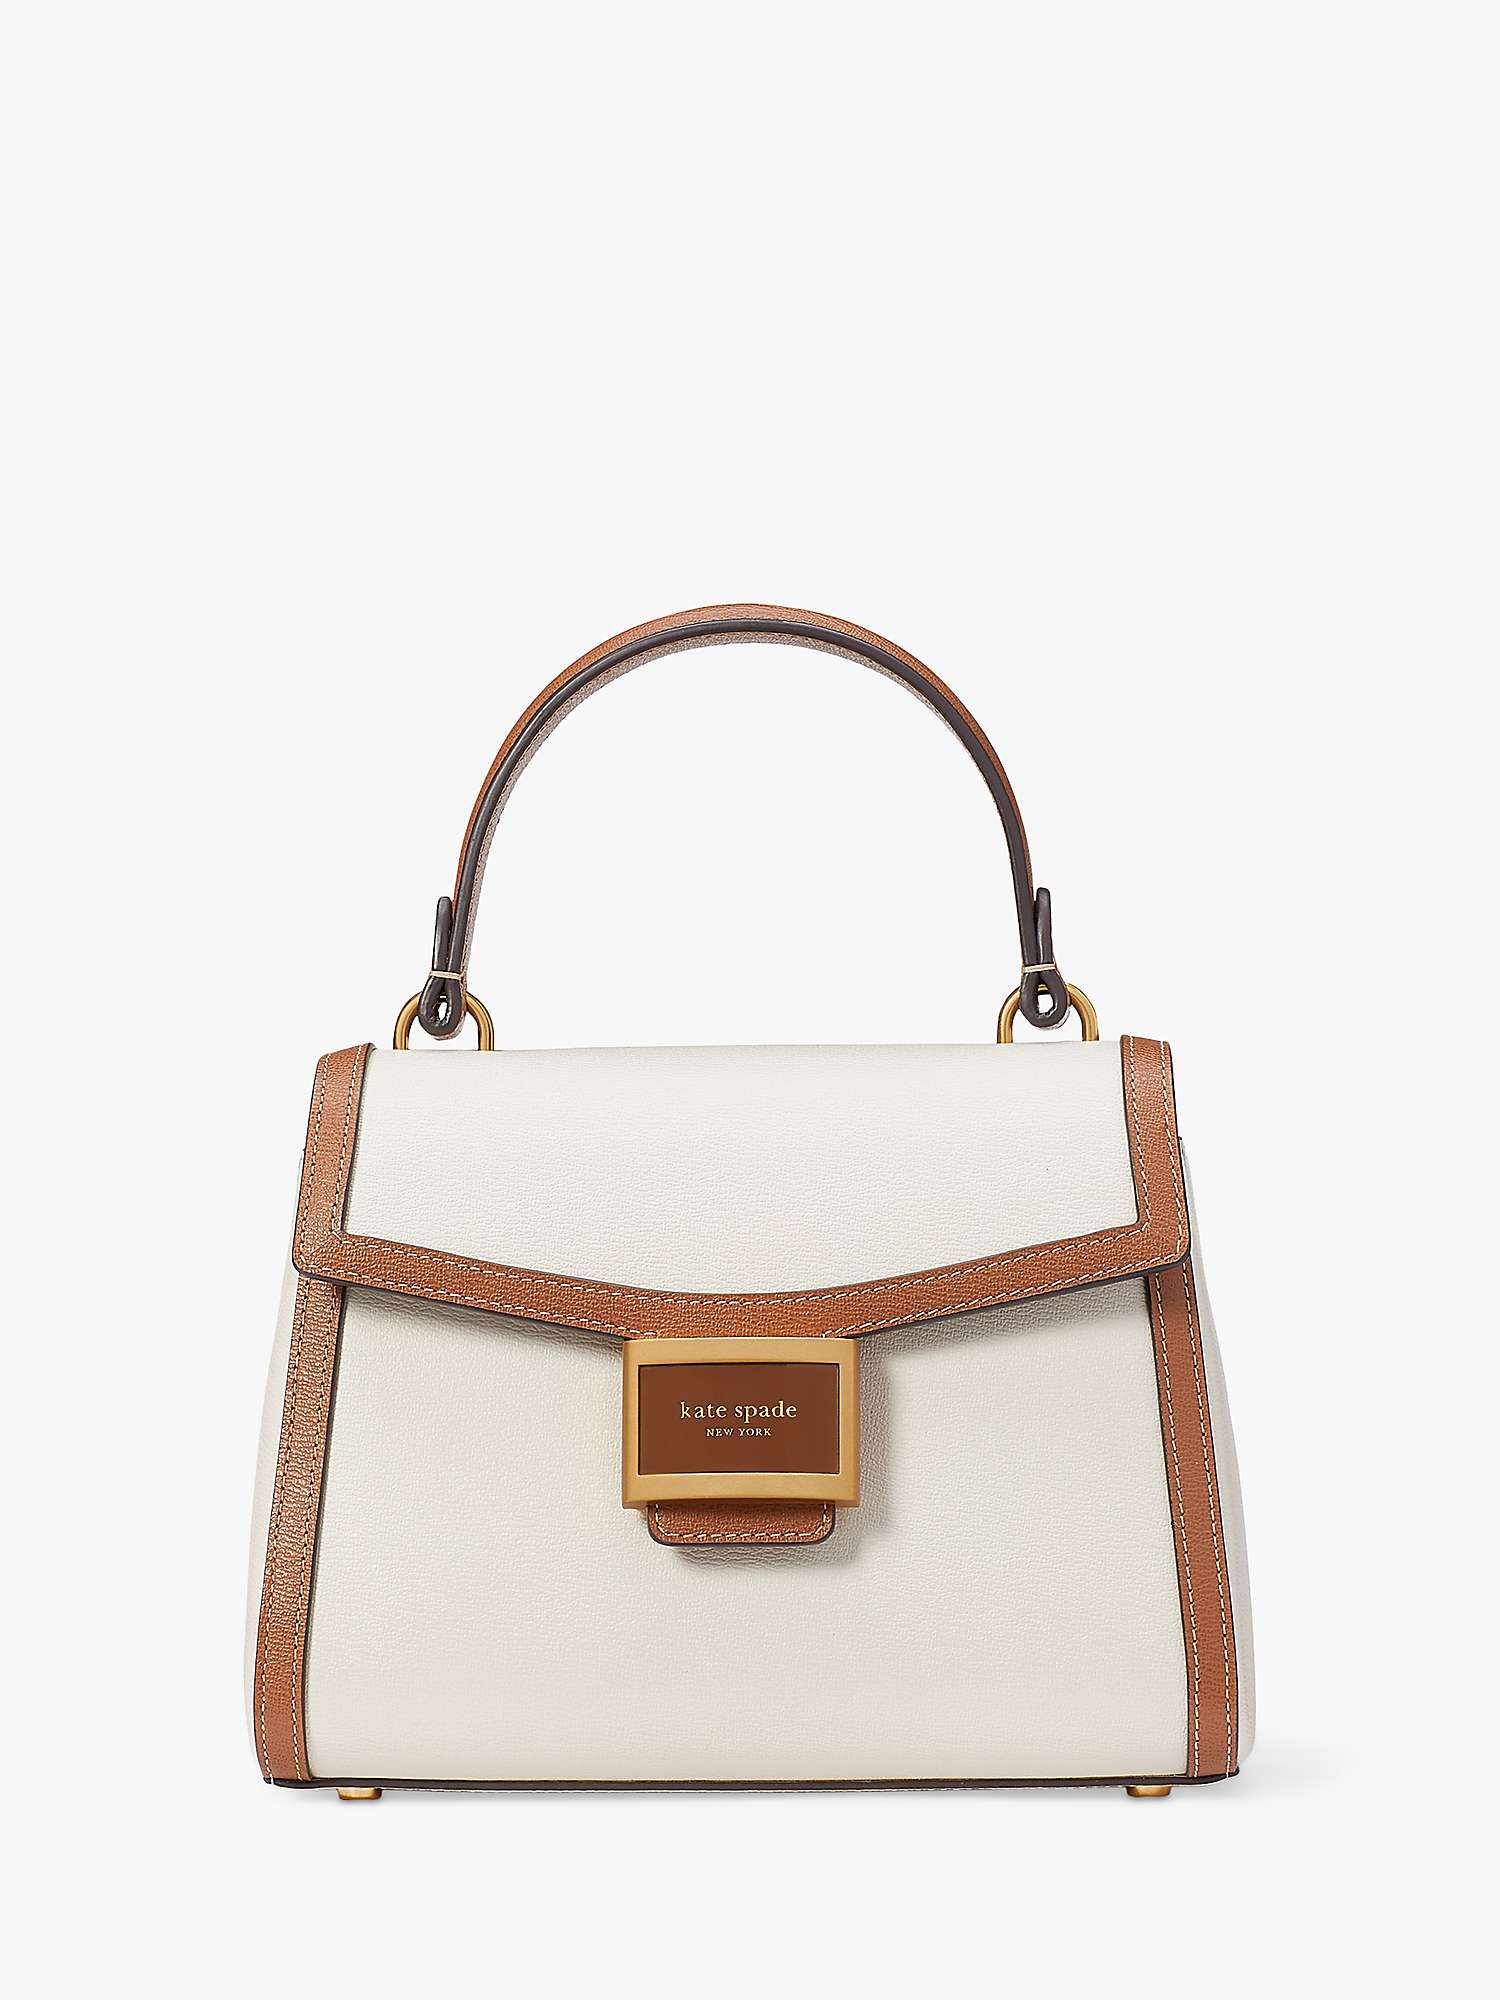 Buy kate spade new york Katie Leather Top Handle Cross Body Bag, Halo White Online at johnlewis.com